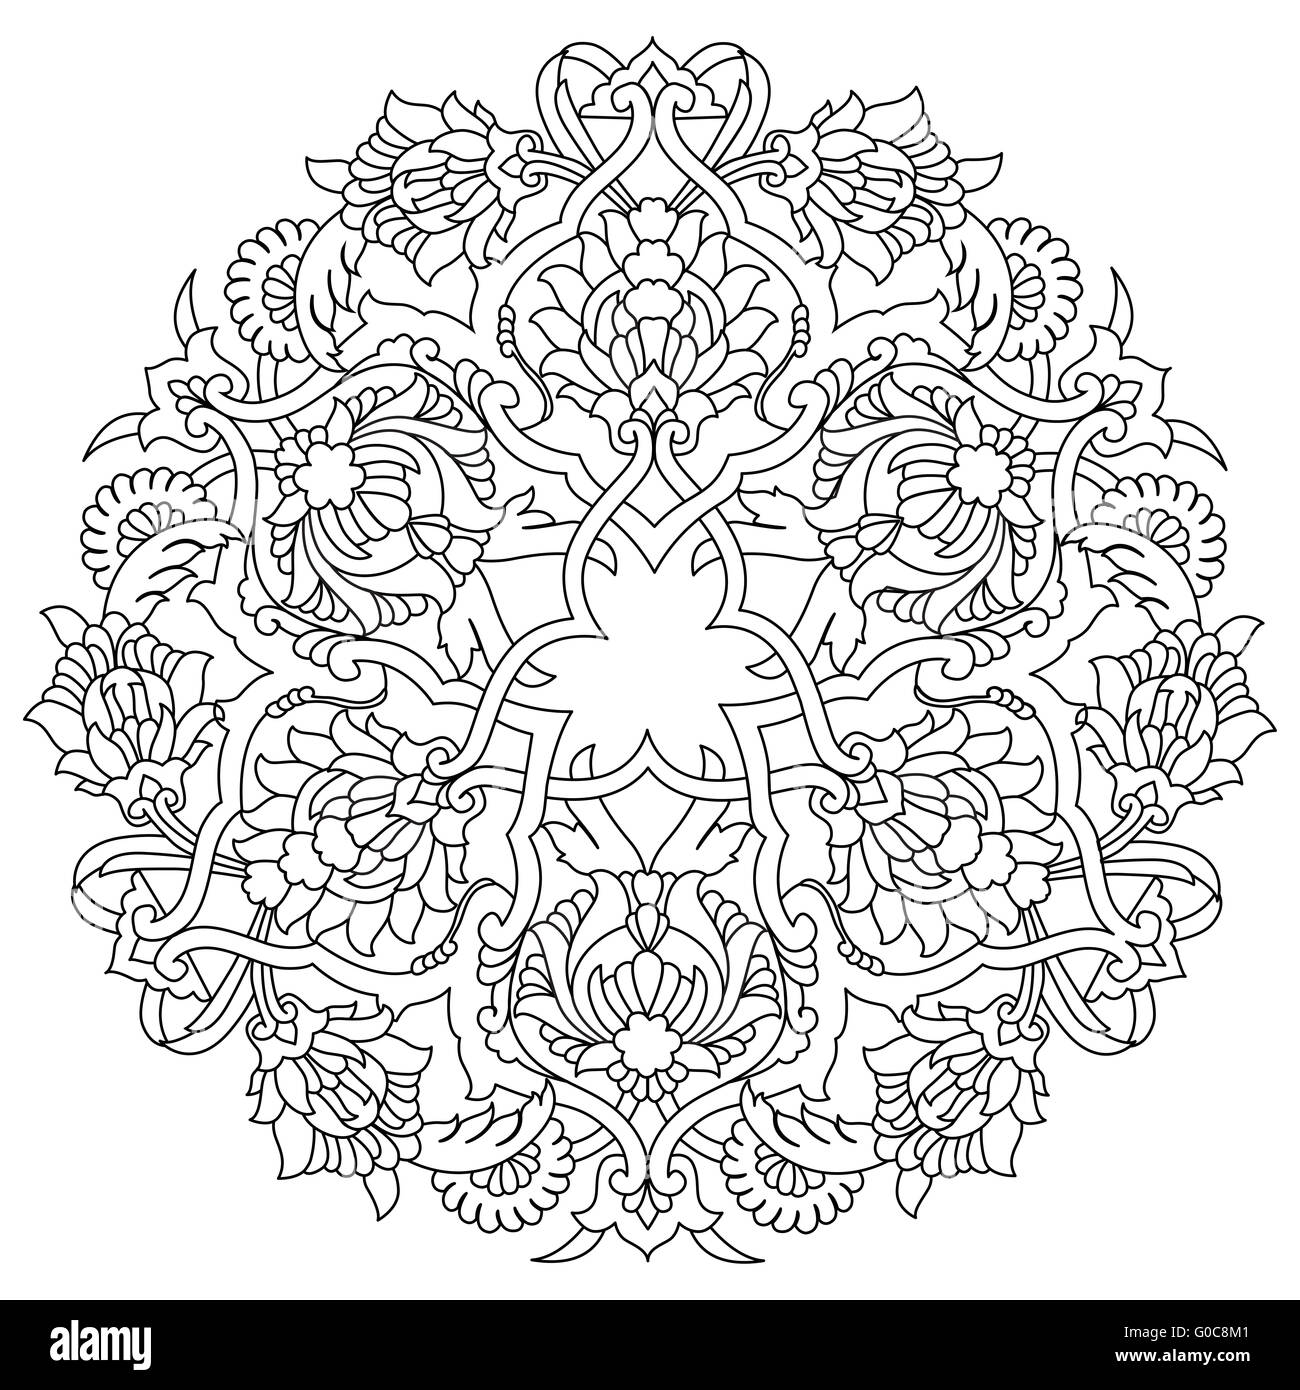 lines artistic ottoman pattern series fifty five Stock Photo